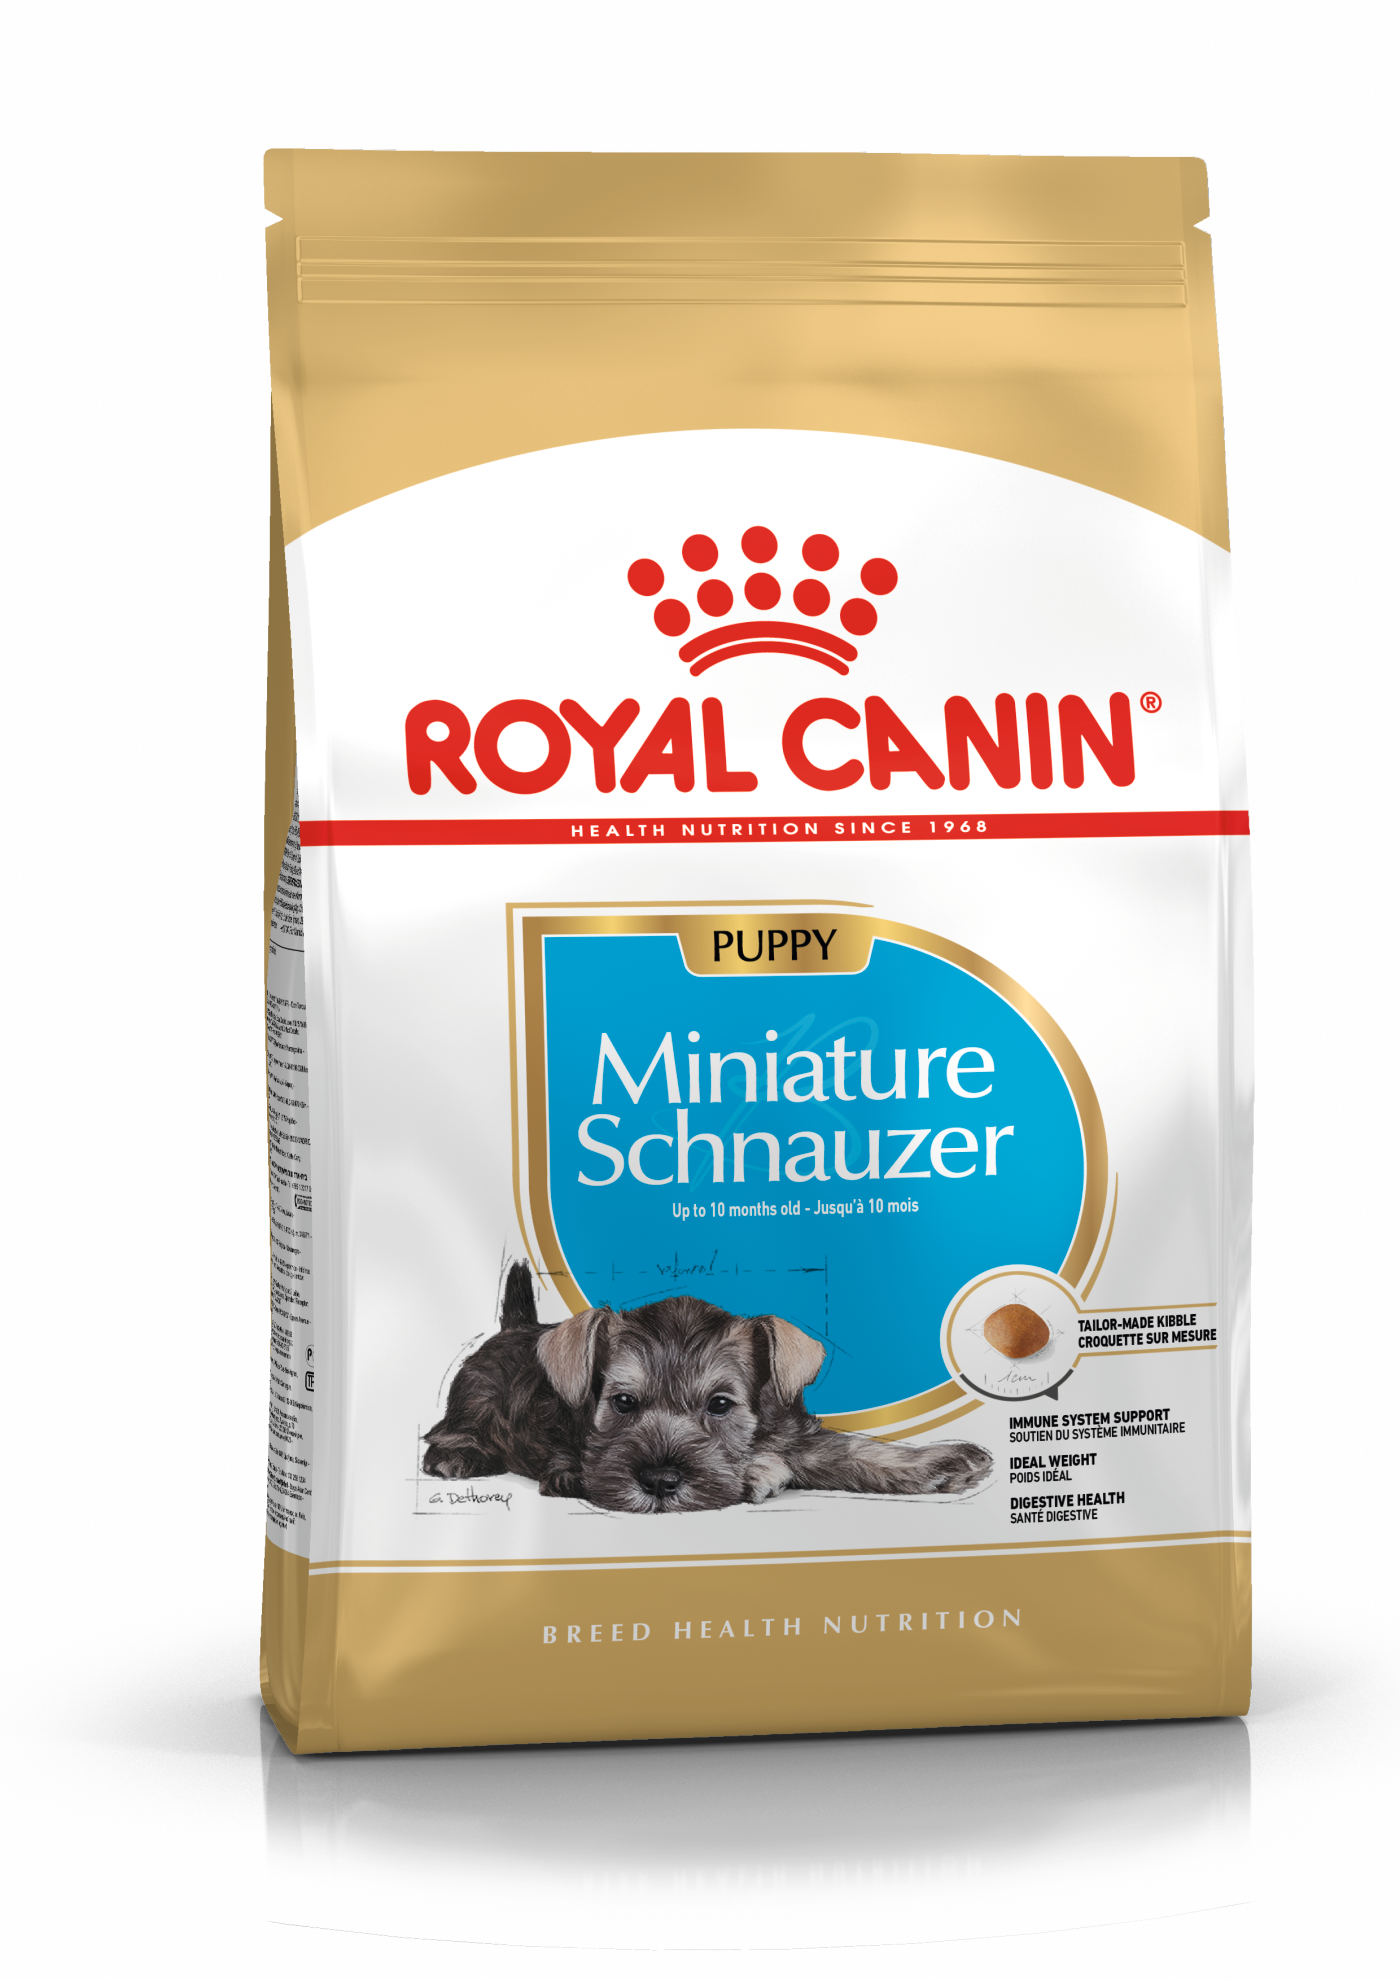 Pack shot of Miniature schnauzer puppy products